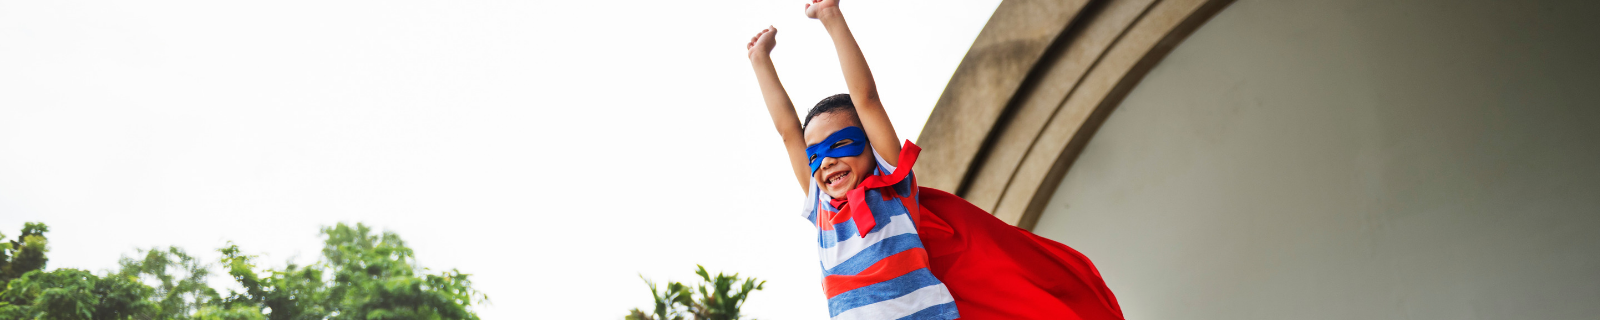 Child in superhero cape displaying courage